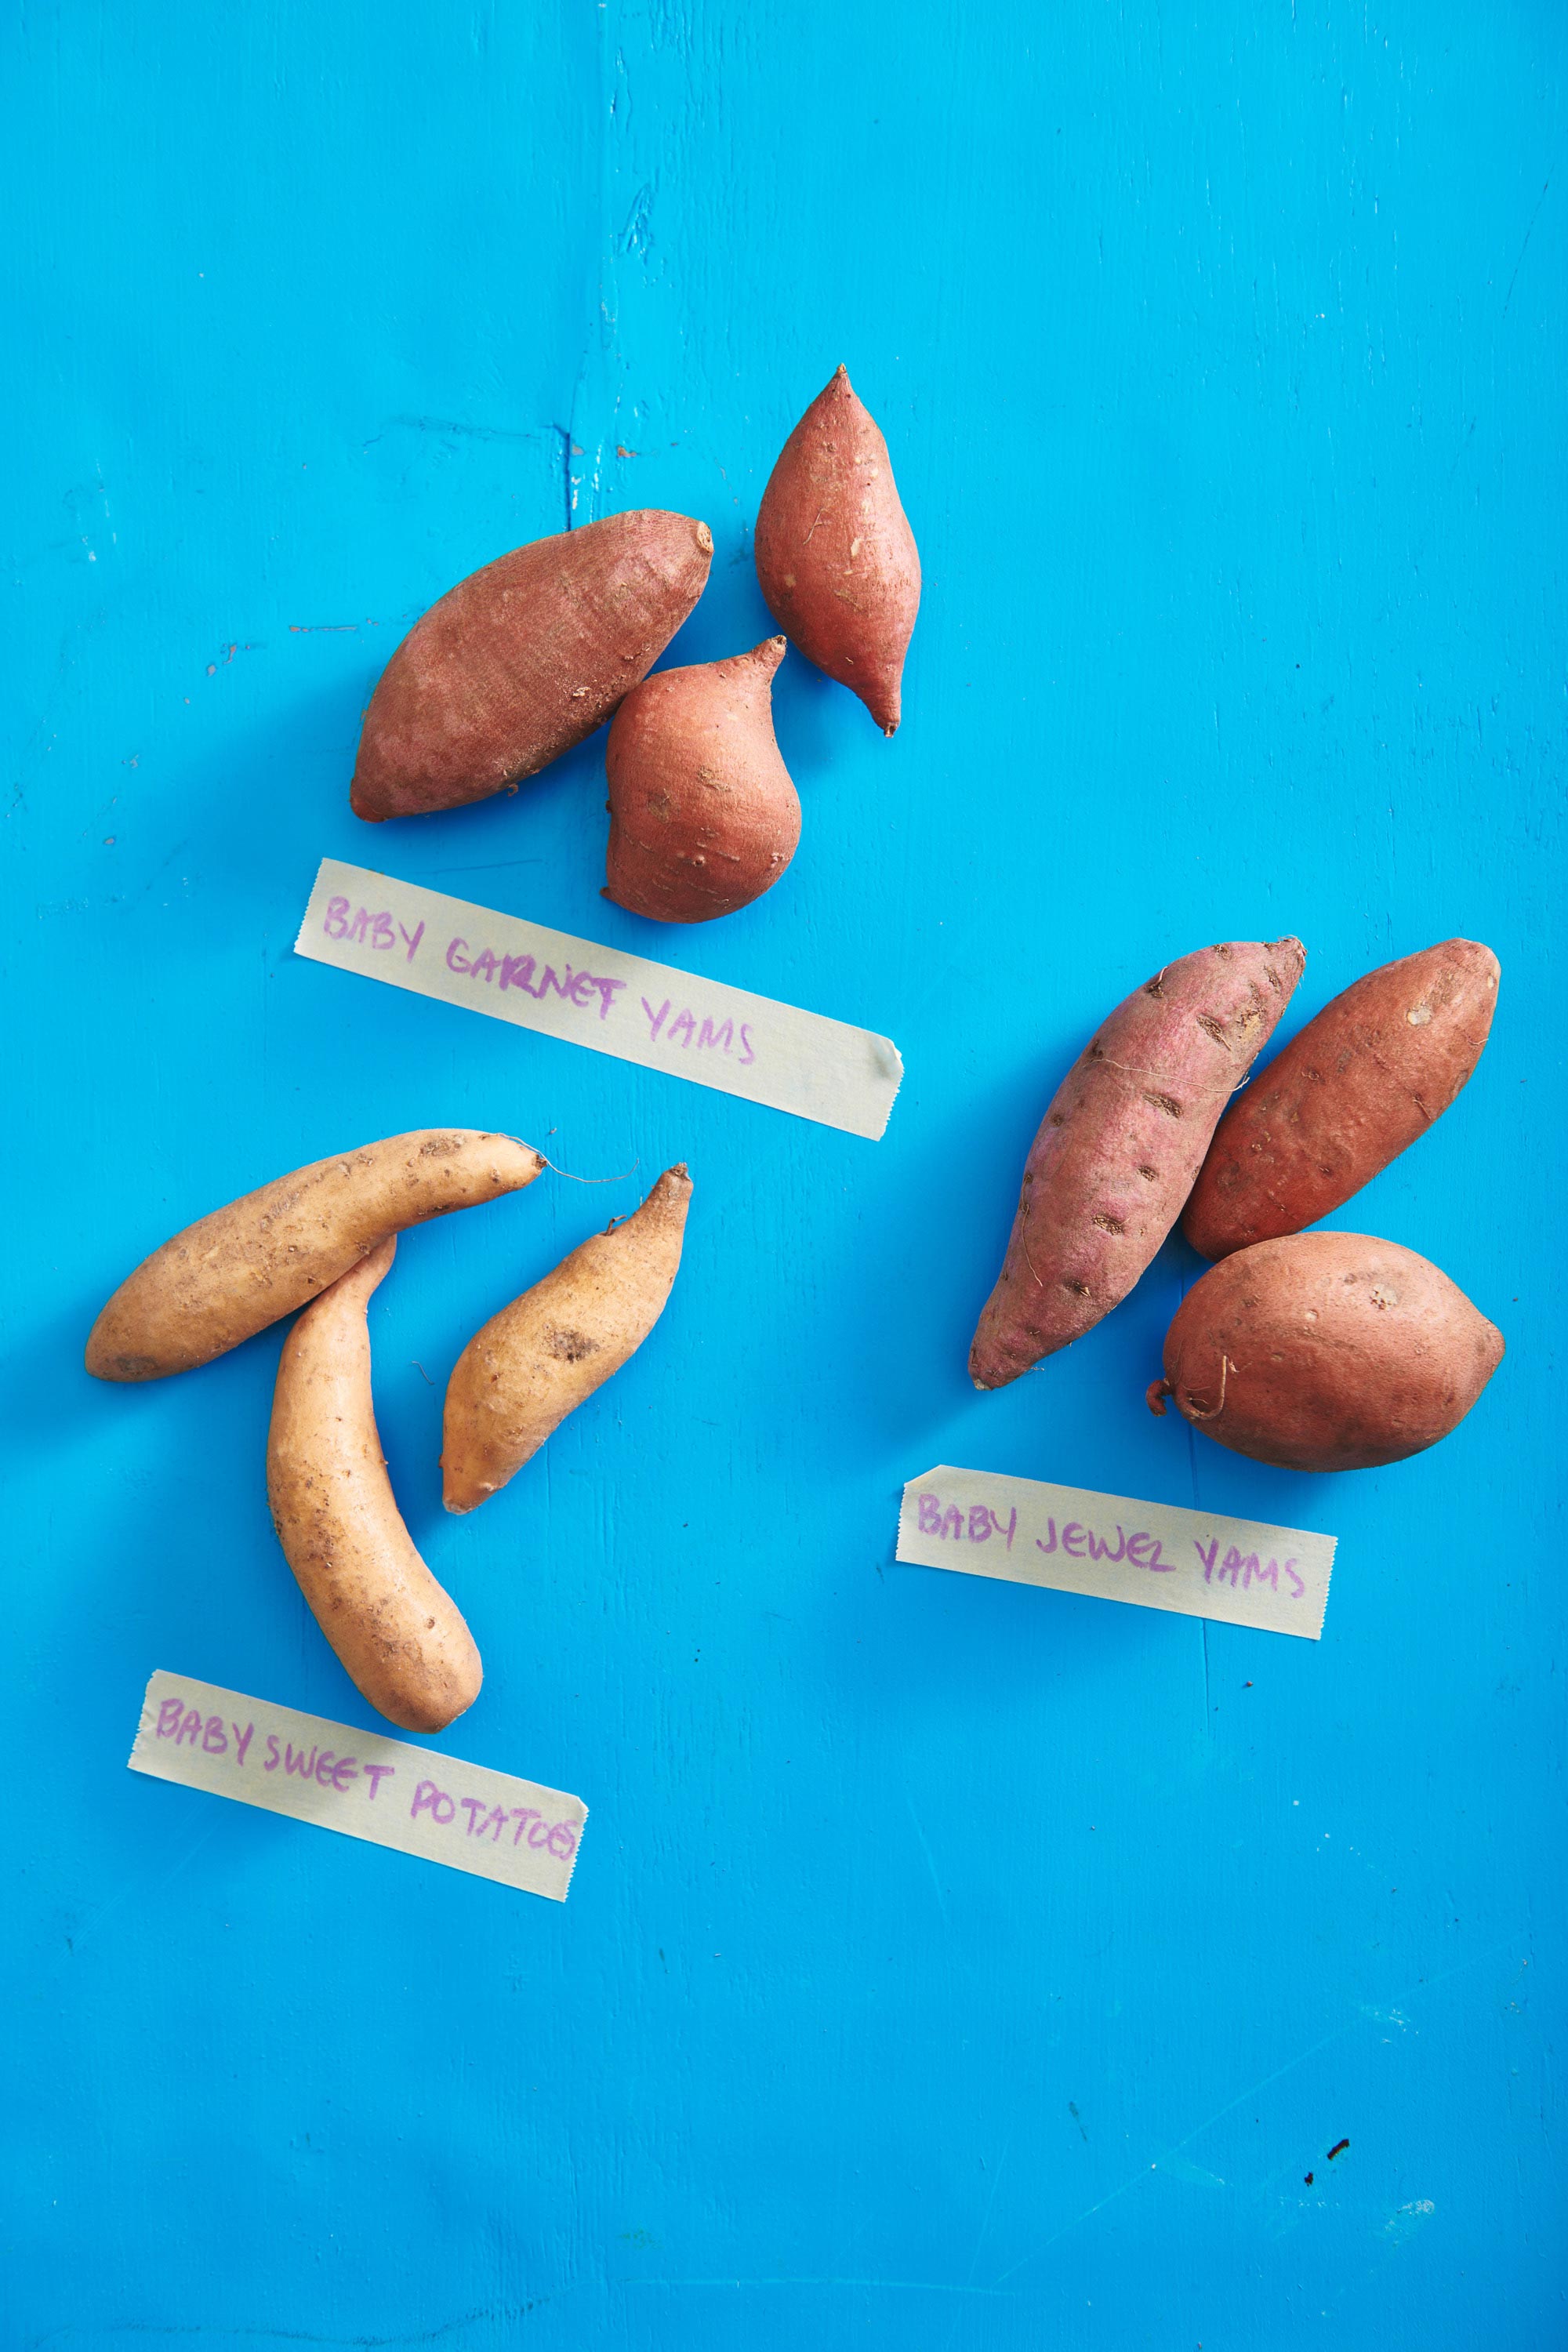 Several varieties of baby sweet potatoes on a bright blue surface.